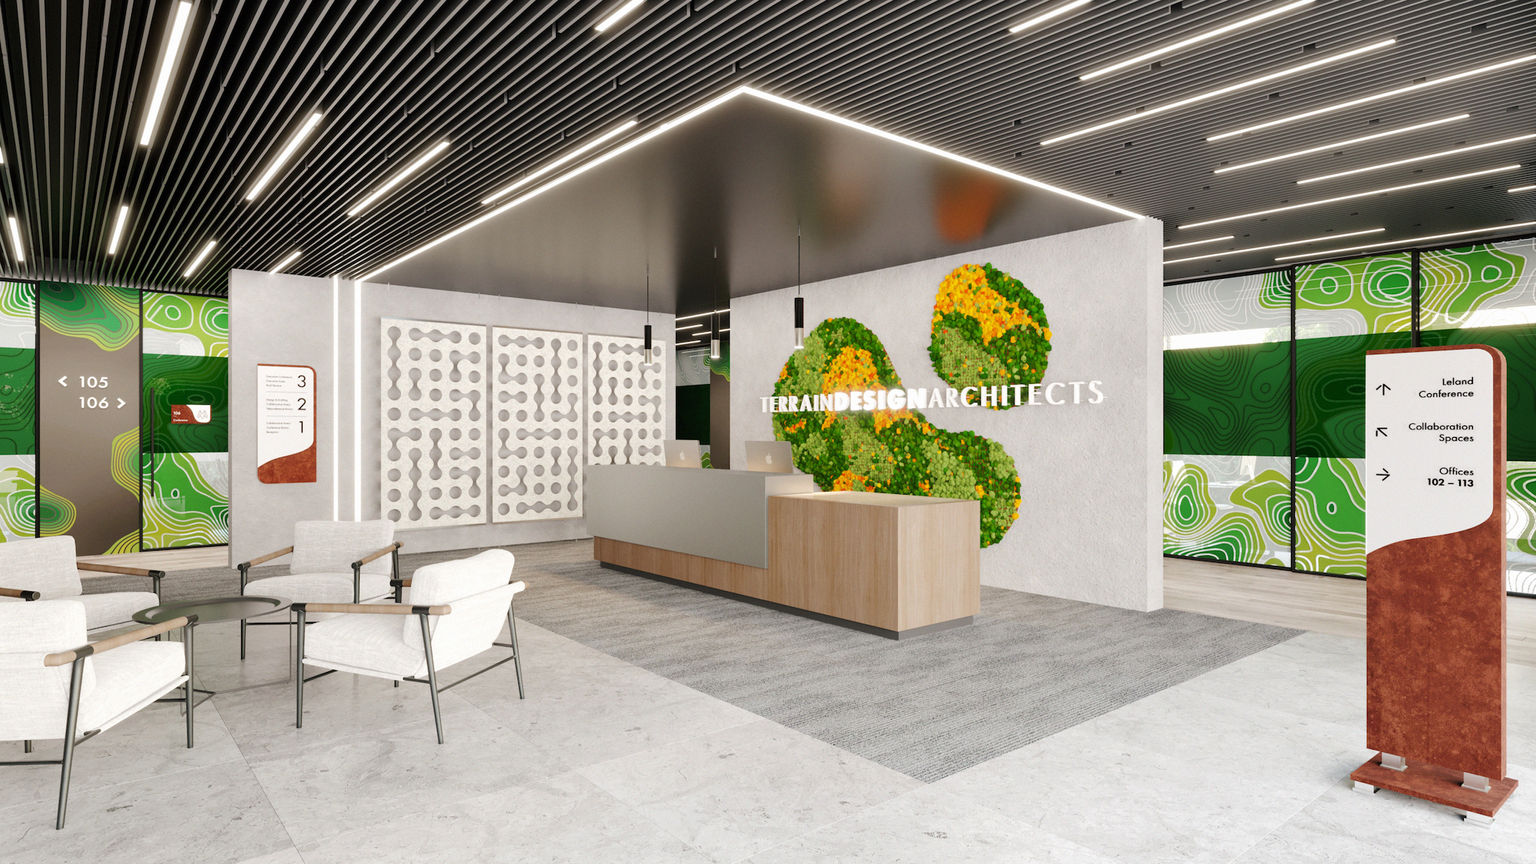 The lobby for a landscape architecture firm office features experiential graphics with a topographic map theme.